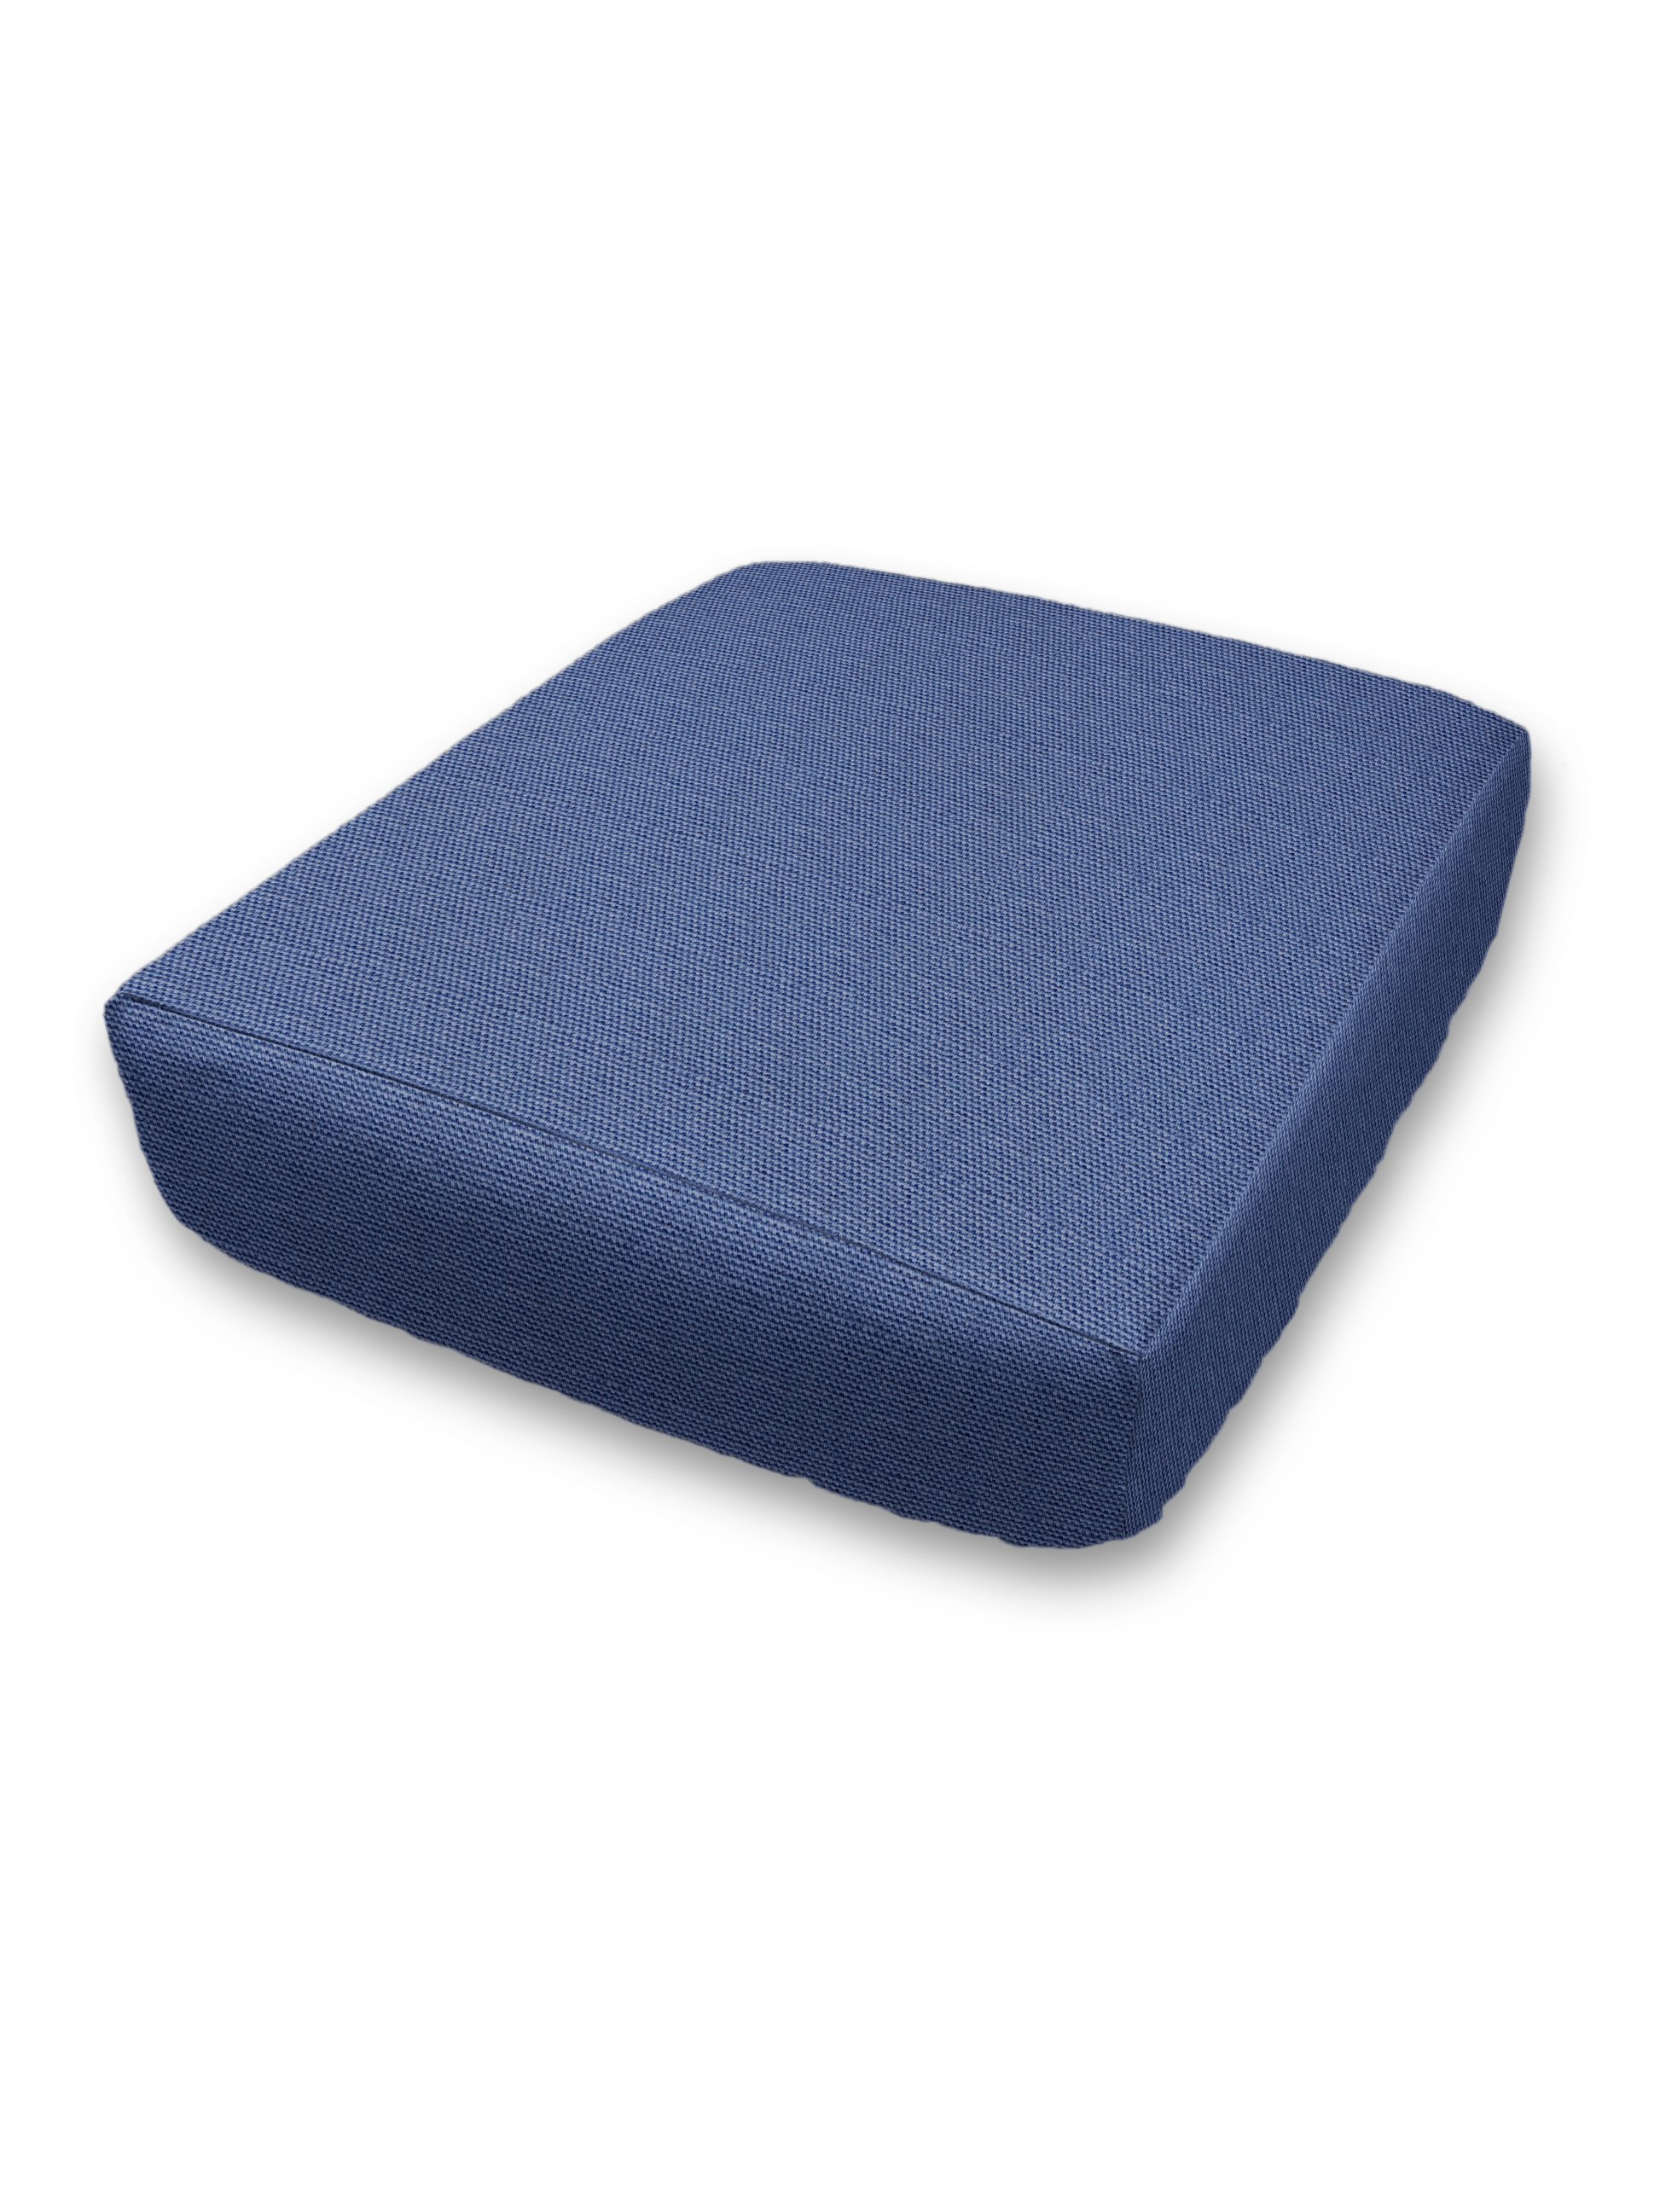 *Ready Ship* RV Dinette Bundle 4 Piece Elastic Fitted Cushion Covers - Durable Duck Canvas - Captain Navy Color